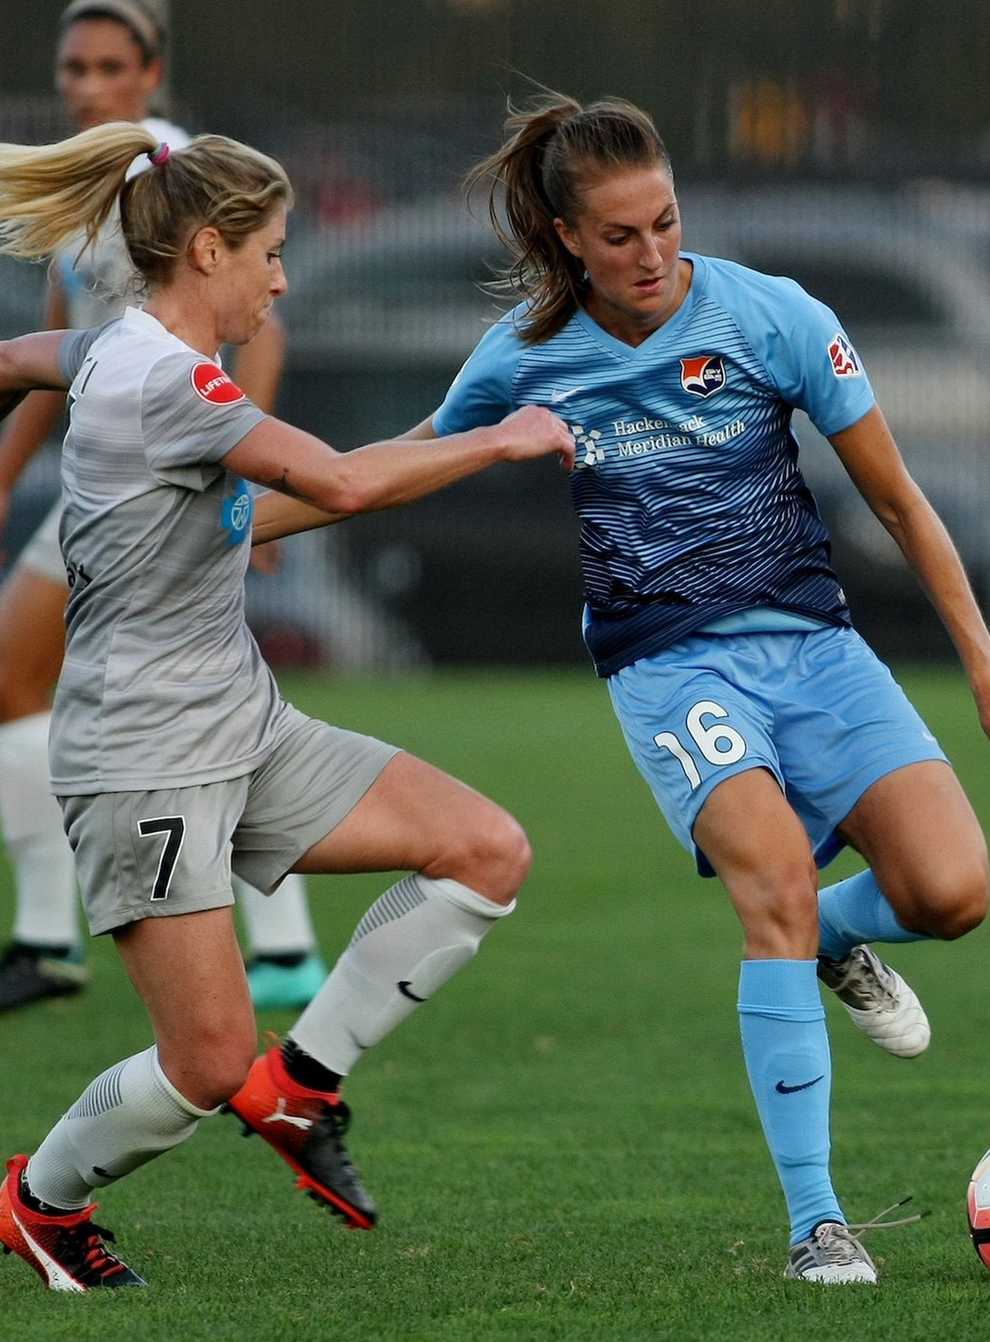 <p>Woldmoe will join Red Stars for the 2021 season</p>